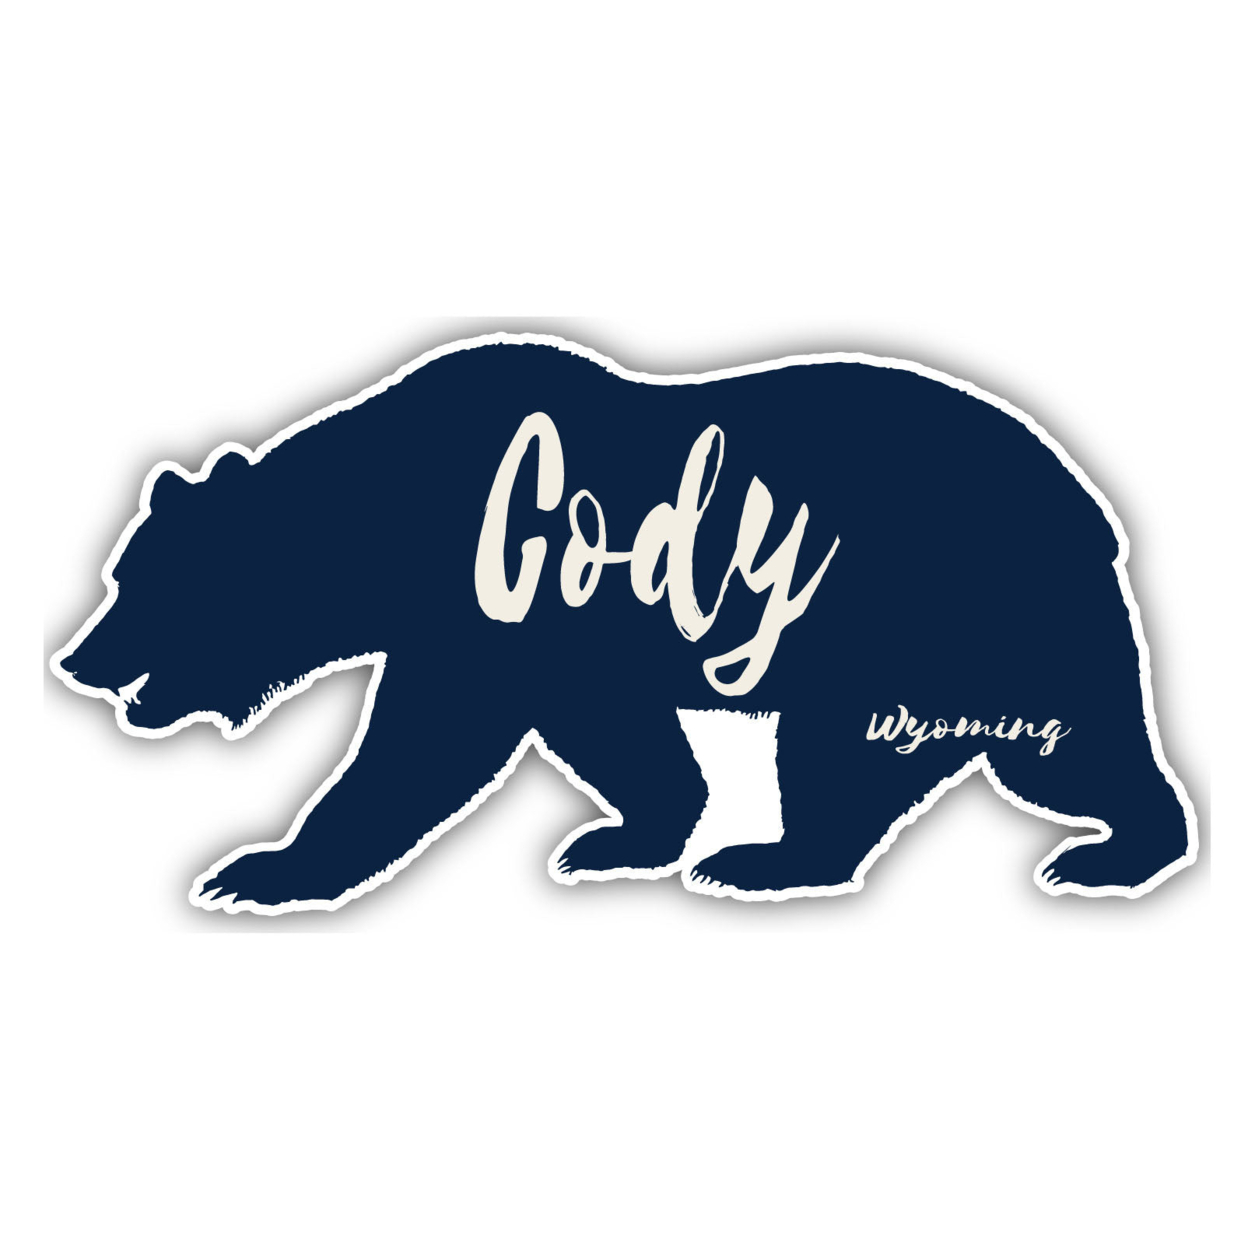 Cody Wyoming Souvenir Decorative Stickers (Choose Theme And Size) - Single Unit, 12-Inch, Bear